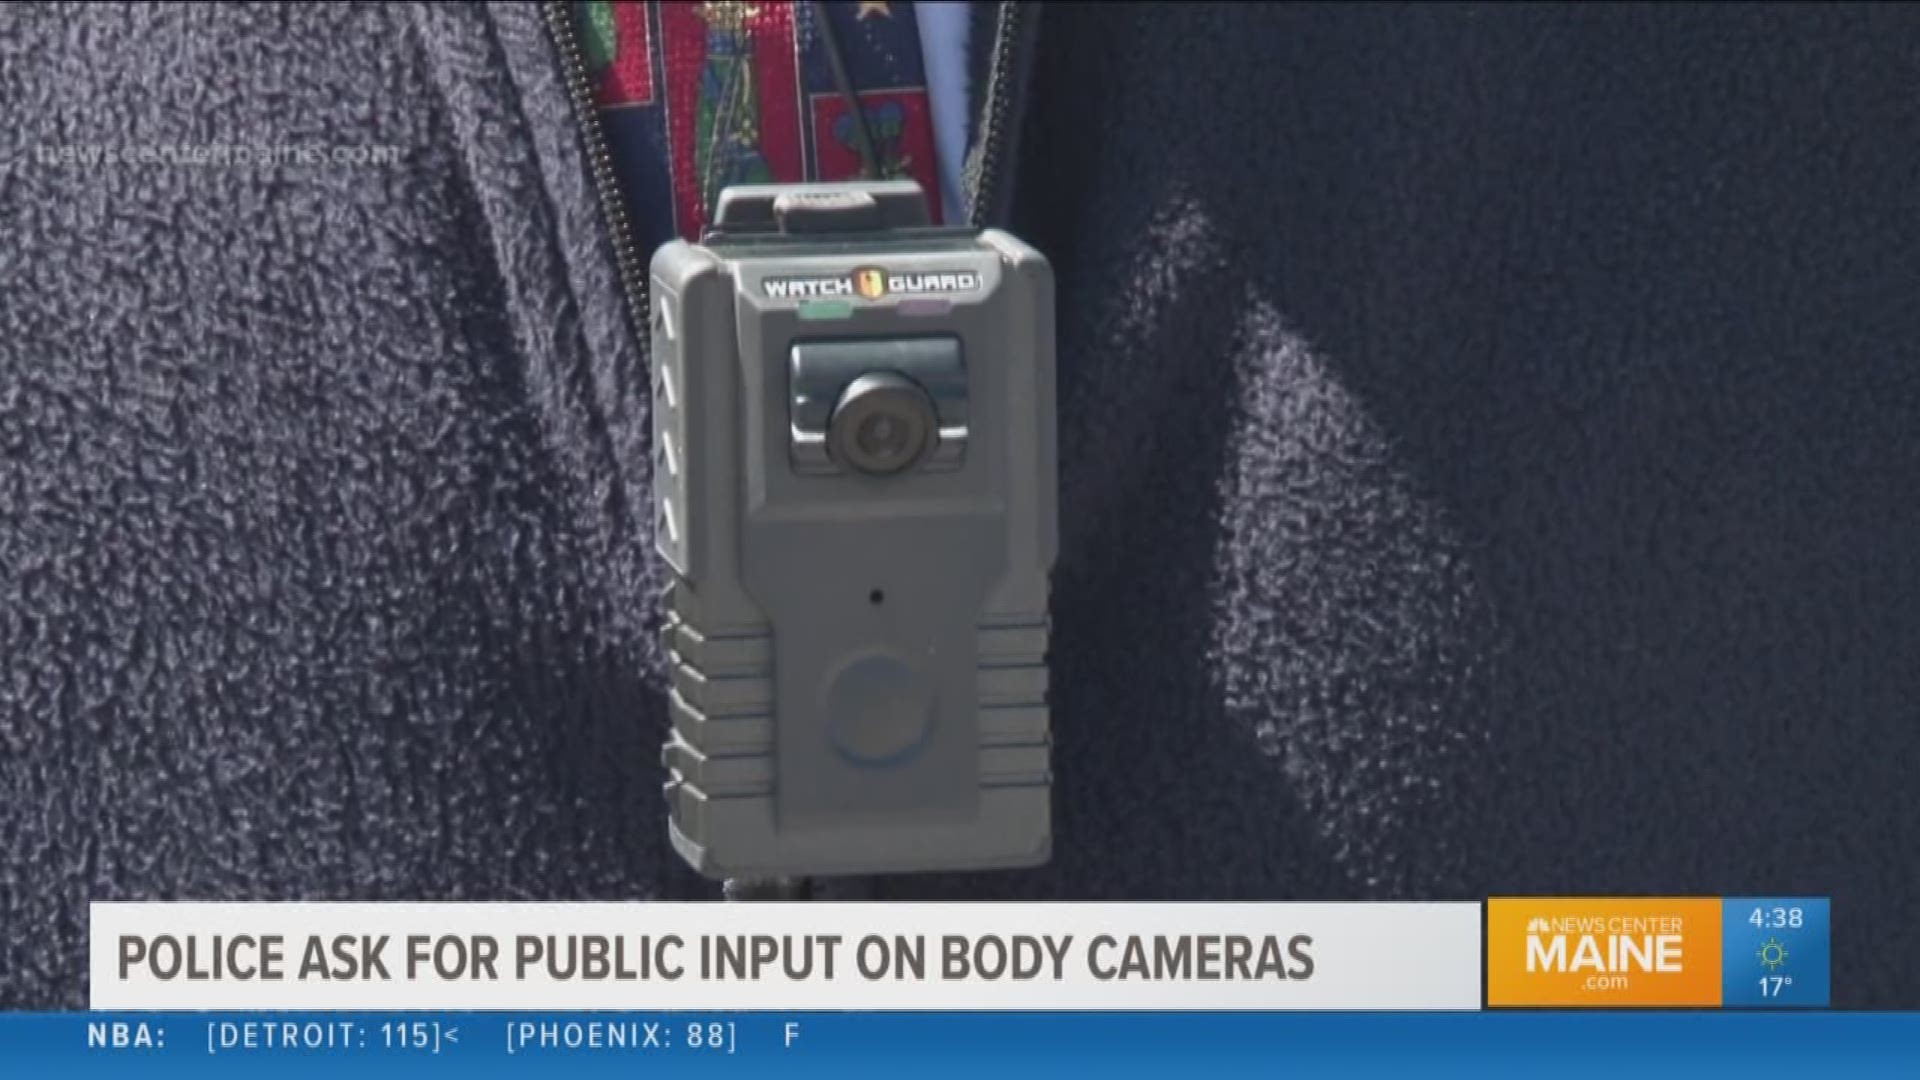 Police ask for public input on body cameras